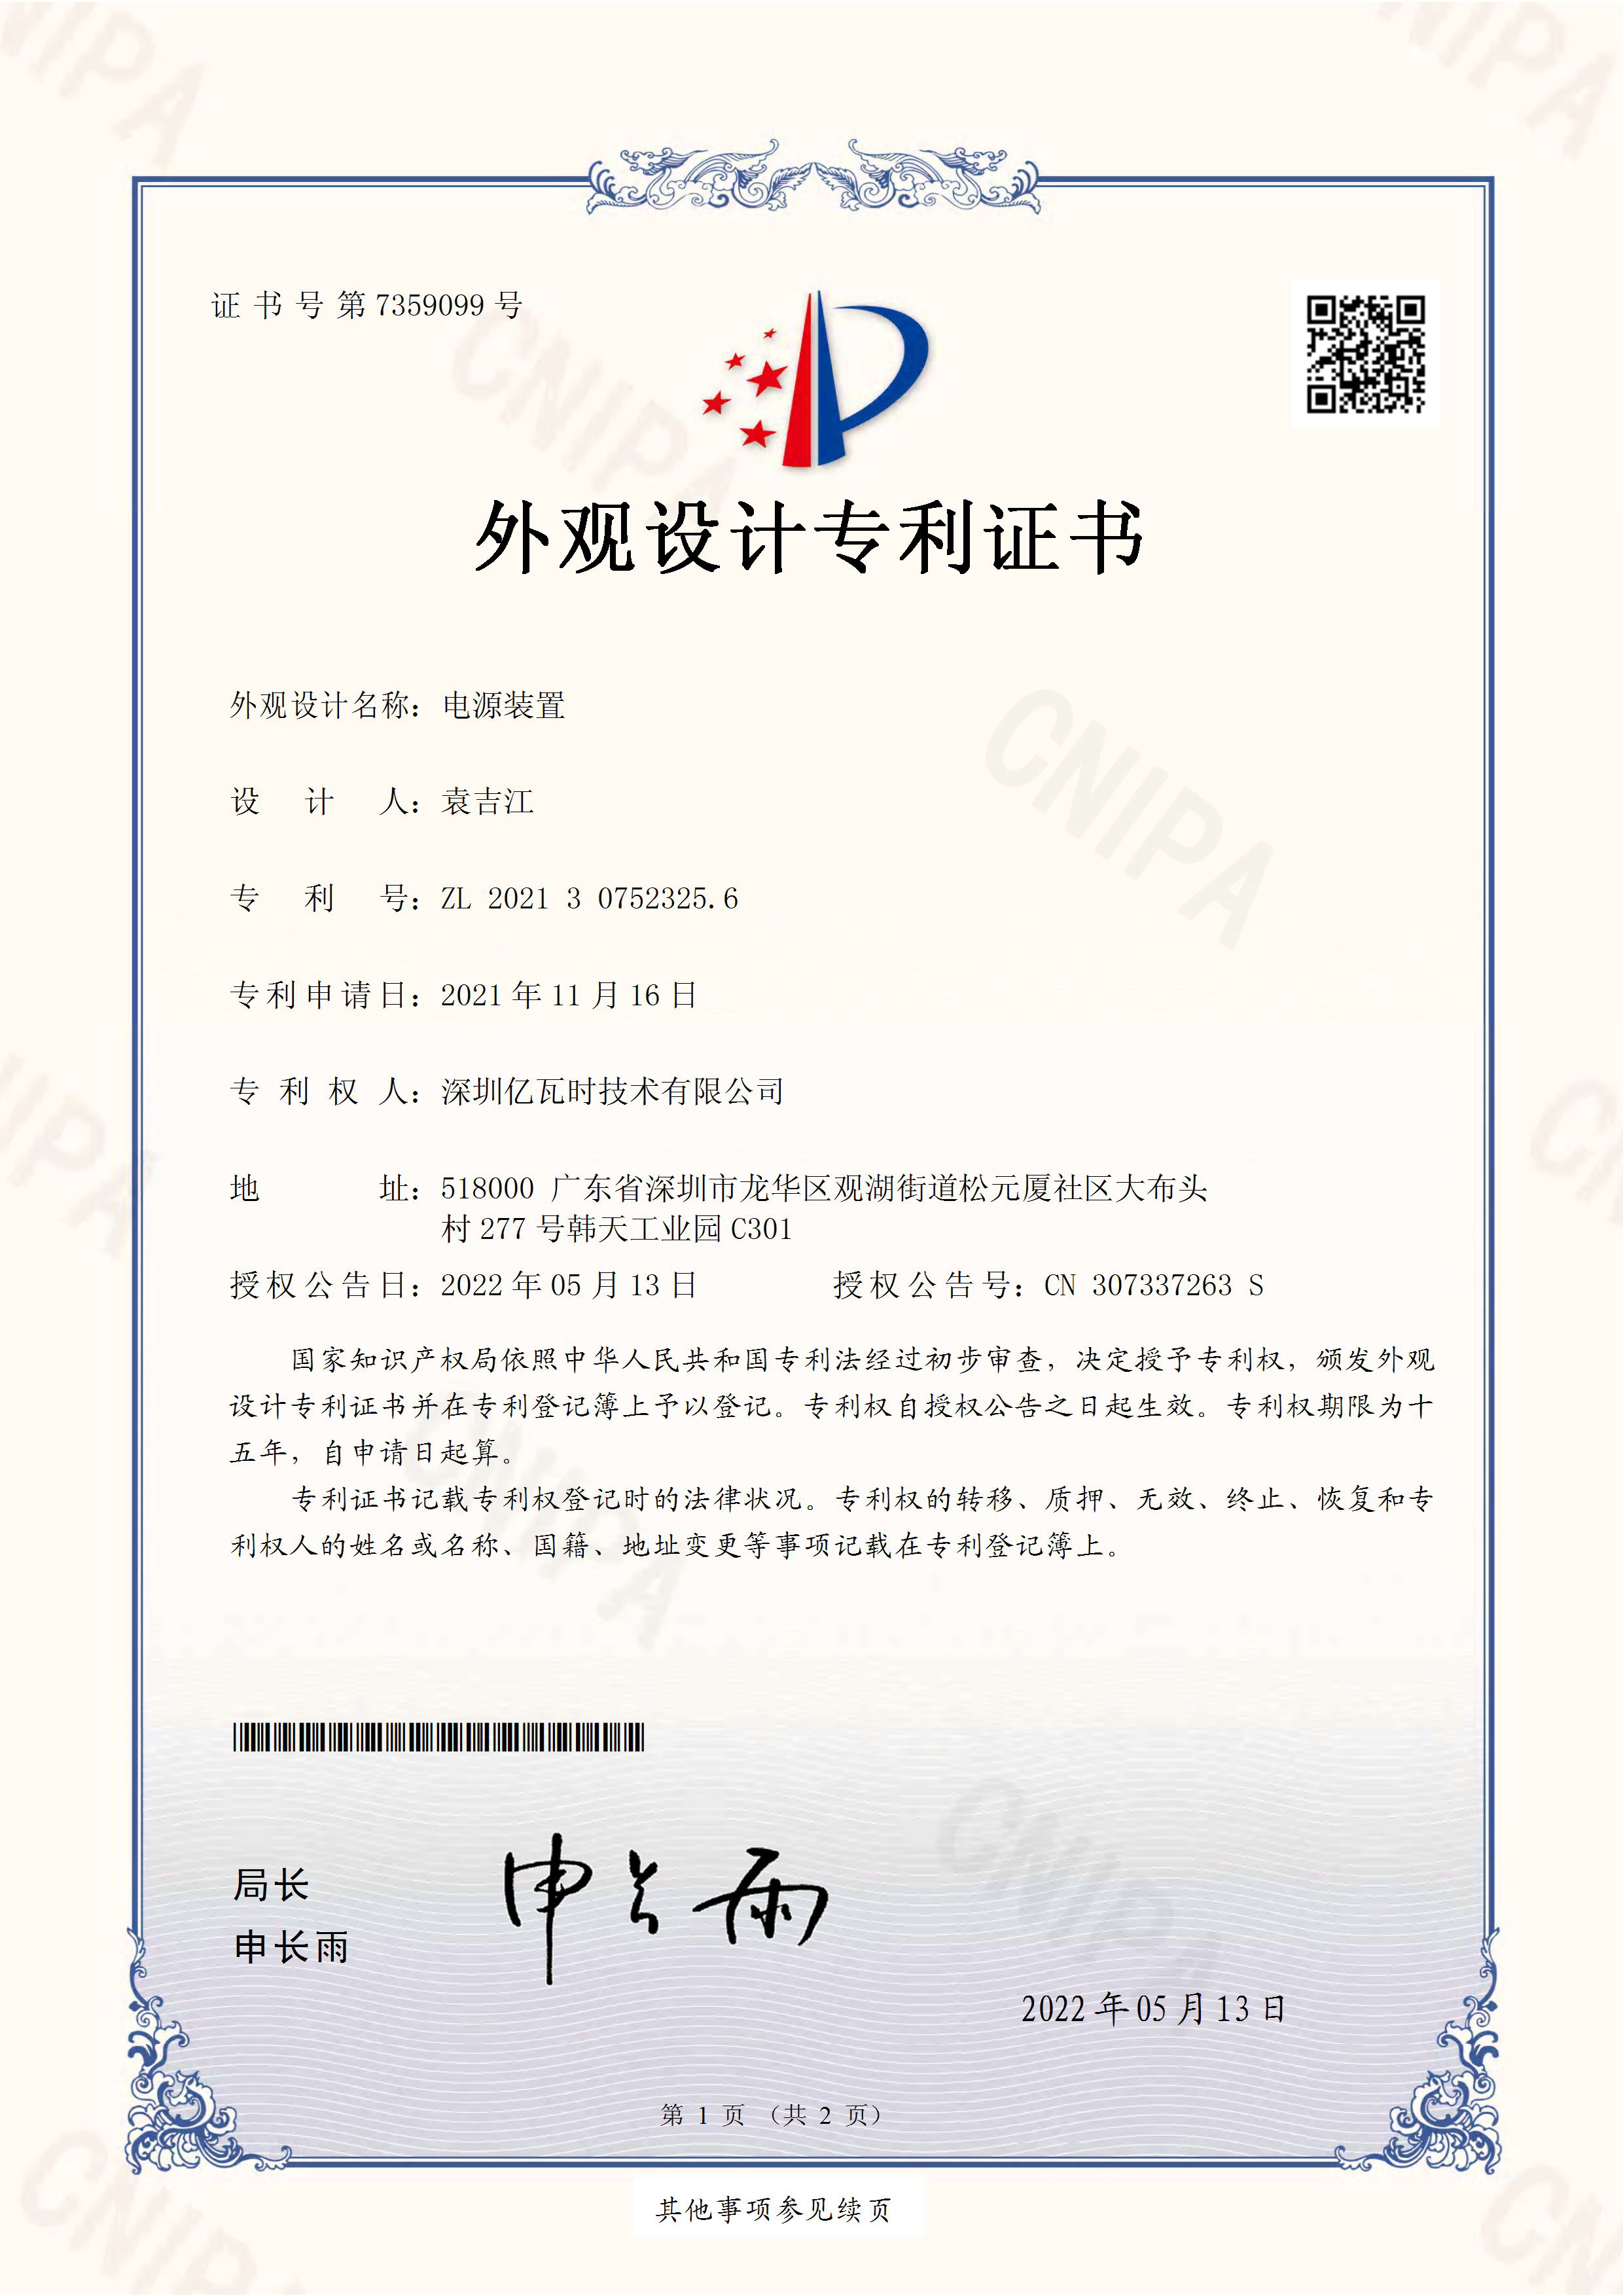 Power supply unit appearance design certificate